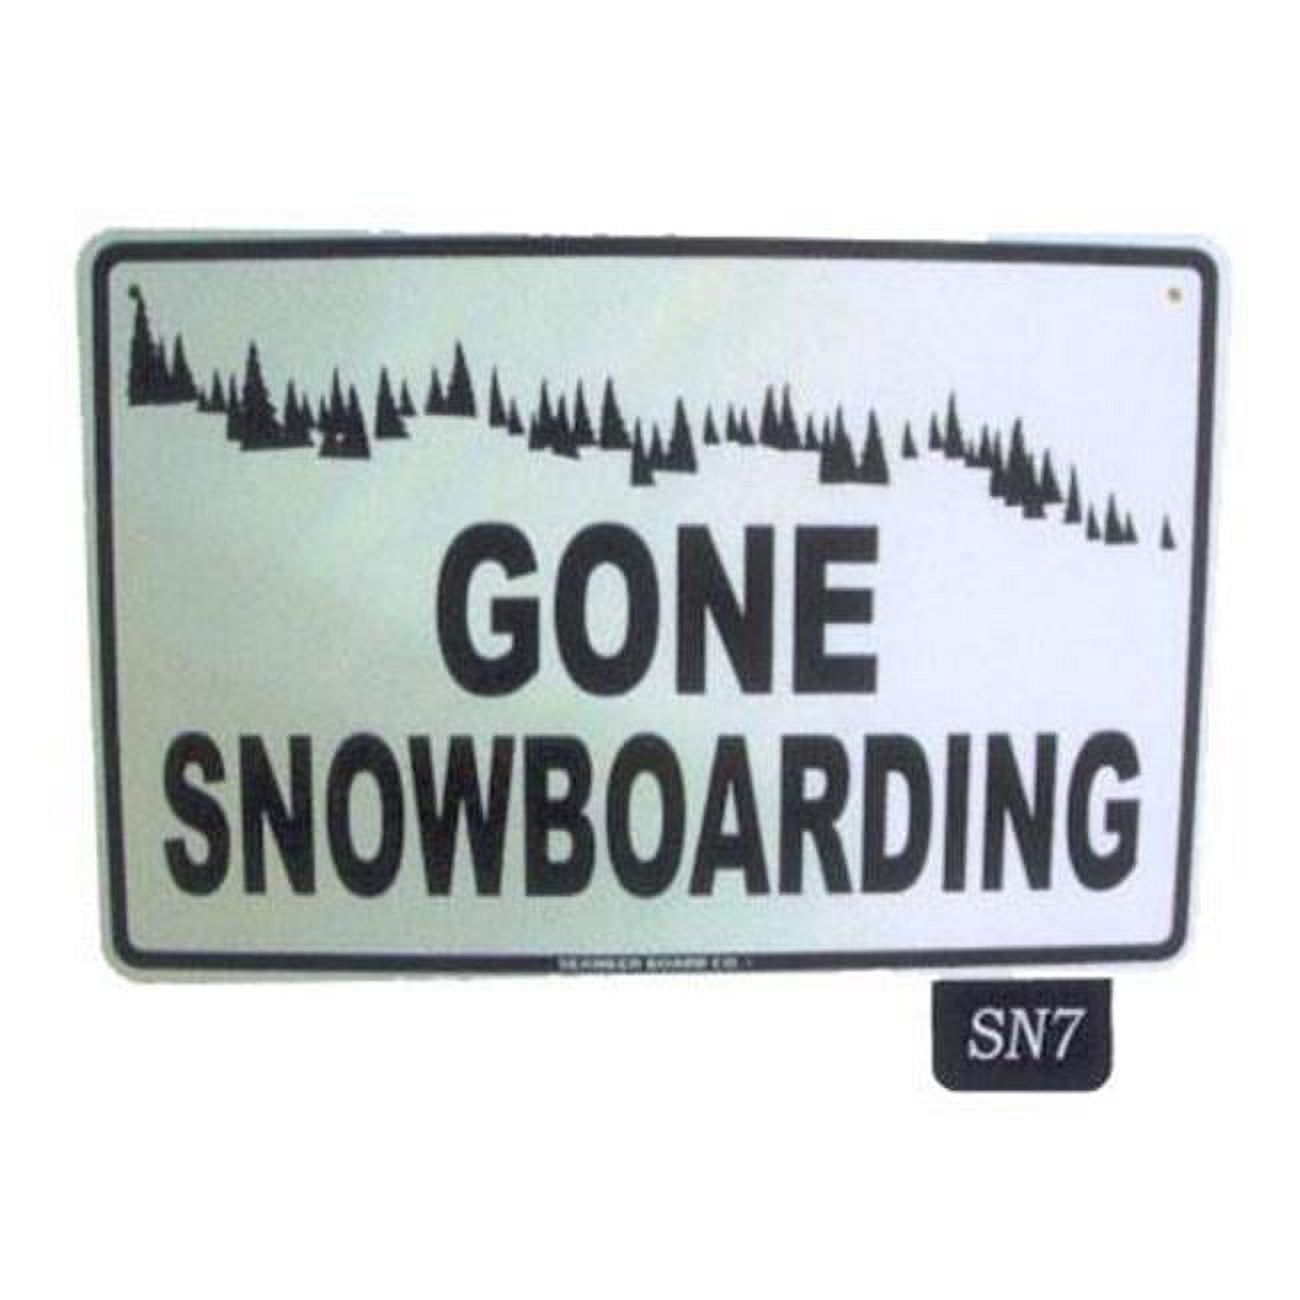 Seaweed Surf Co SN7 12X18 Aluminum Sign Gone Snowboarding - image 1 of 1